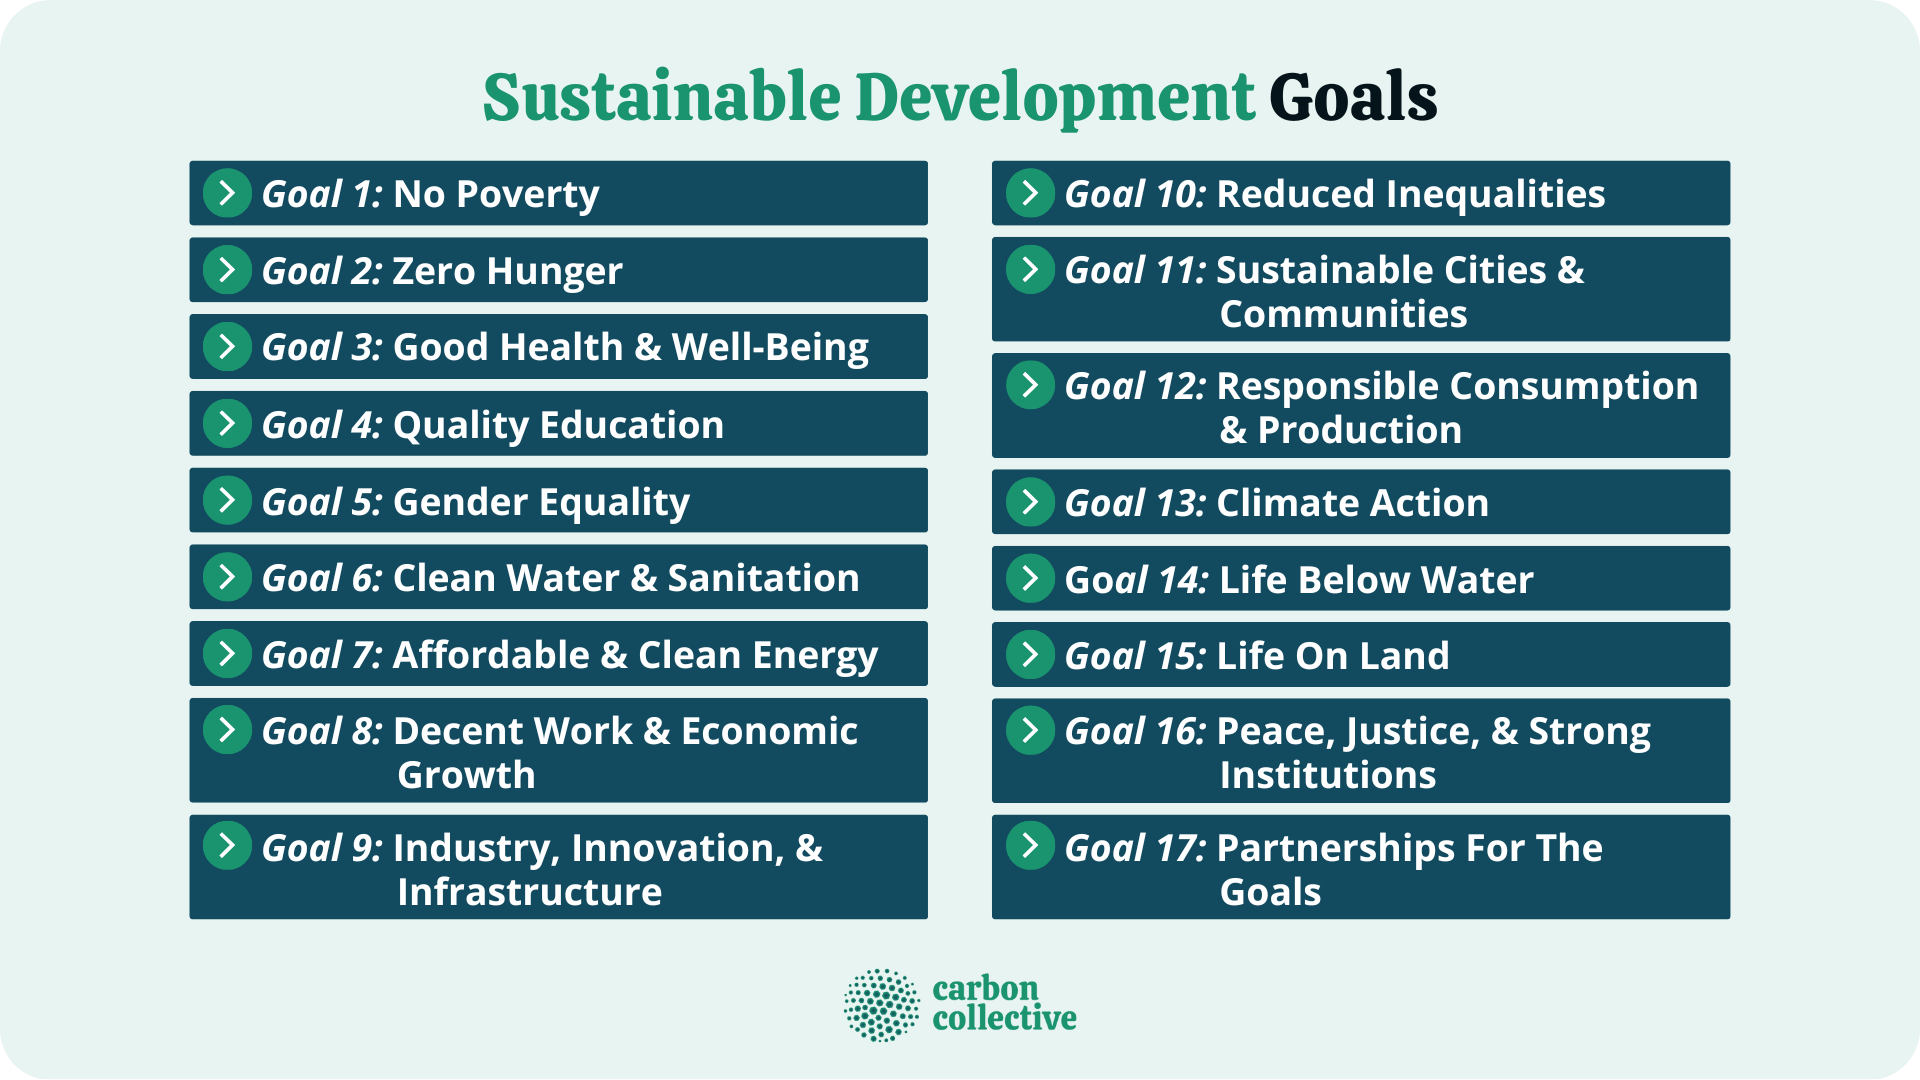 Goal 1: No Poverty - The Global Goals